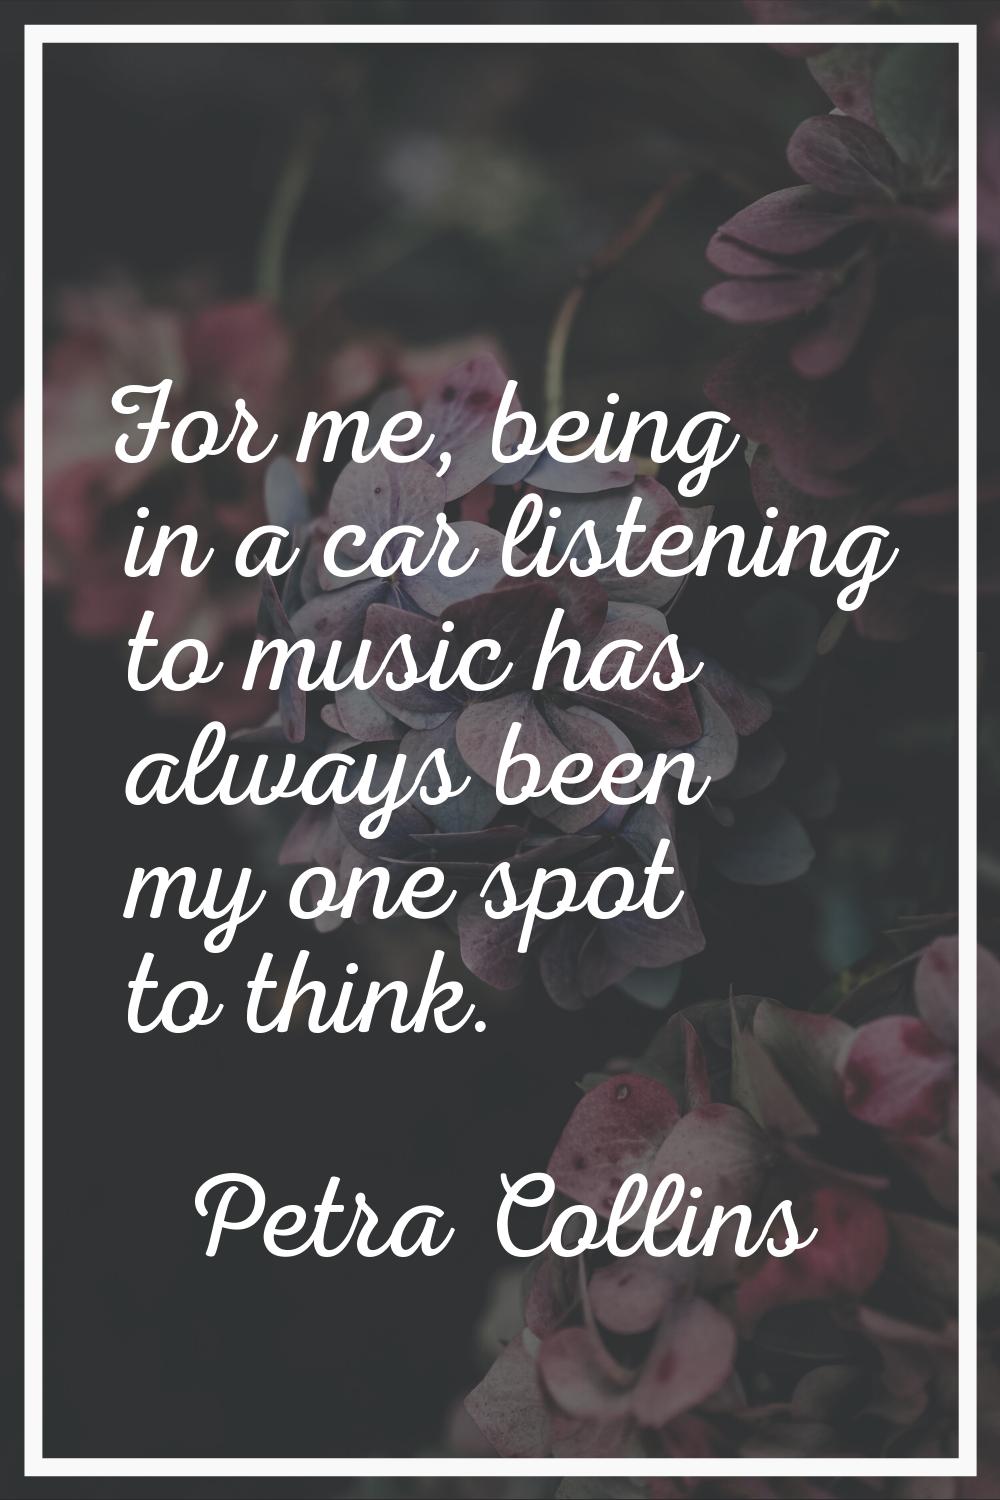 For me, being in a car listening to music has always been my one spot to think.